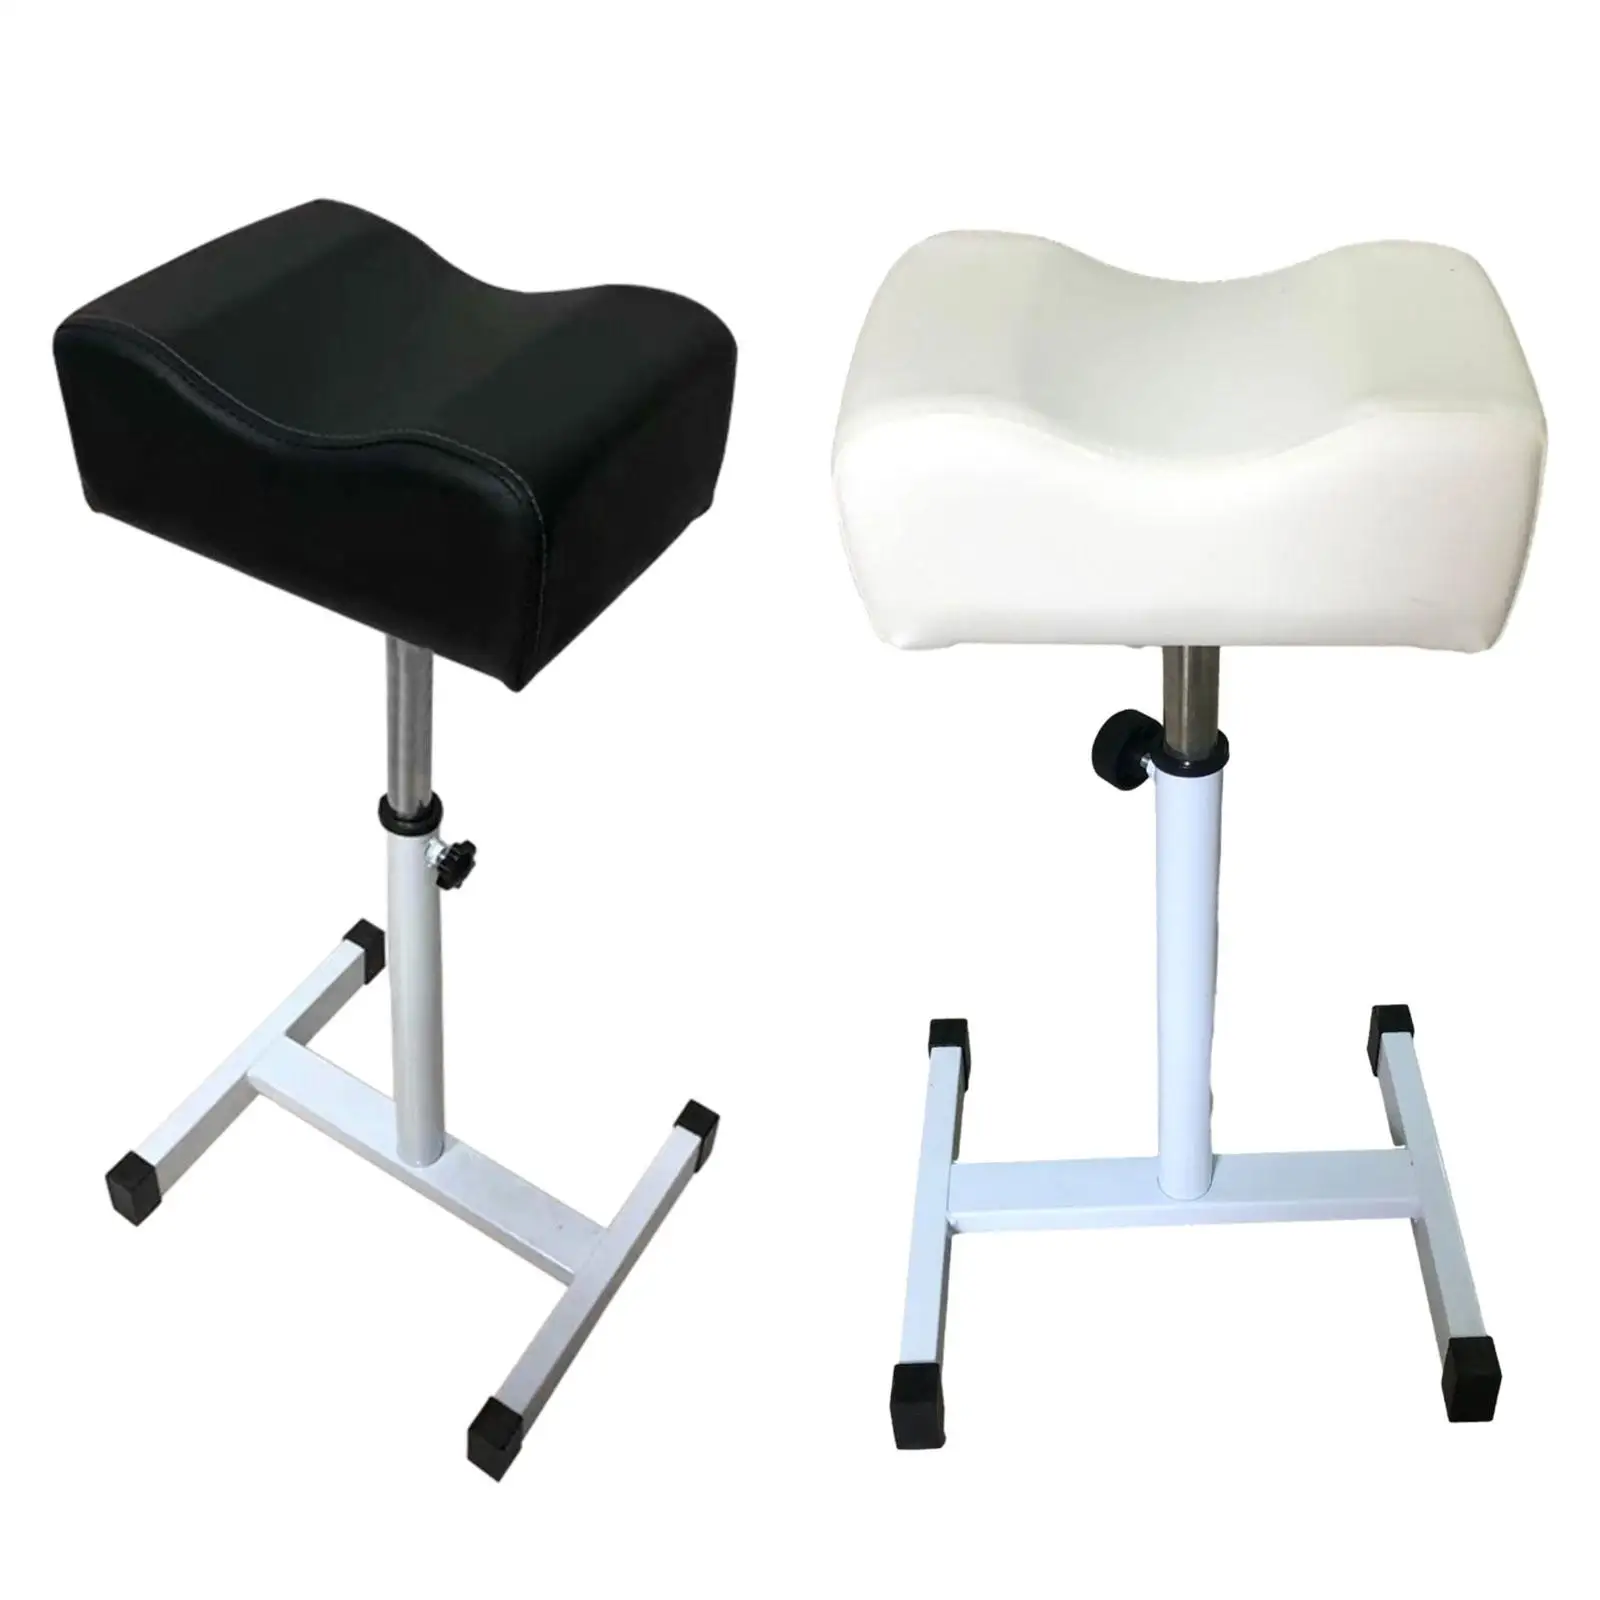 Pedicure Manicure Footrest Foot Nail Beauty Stool Stand Pedicure Nail Equipment Comfortable for Salon Home Pedicure SPA